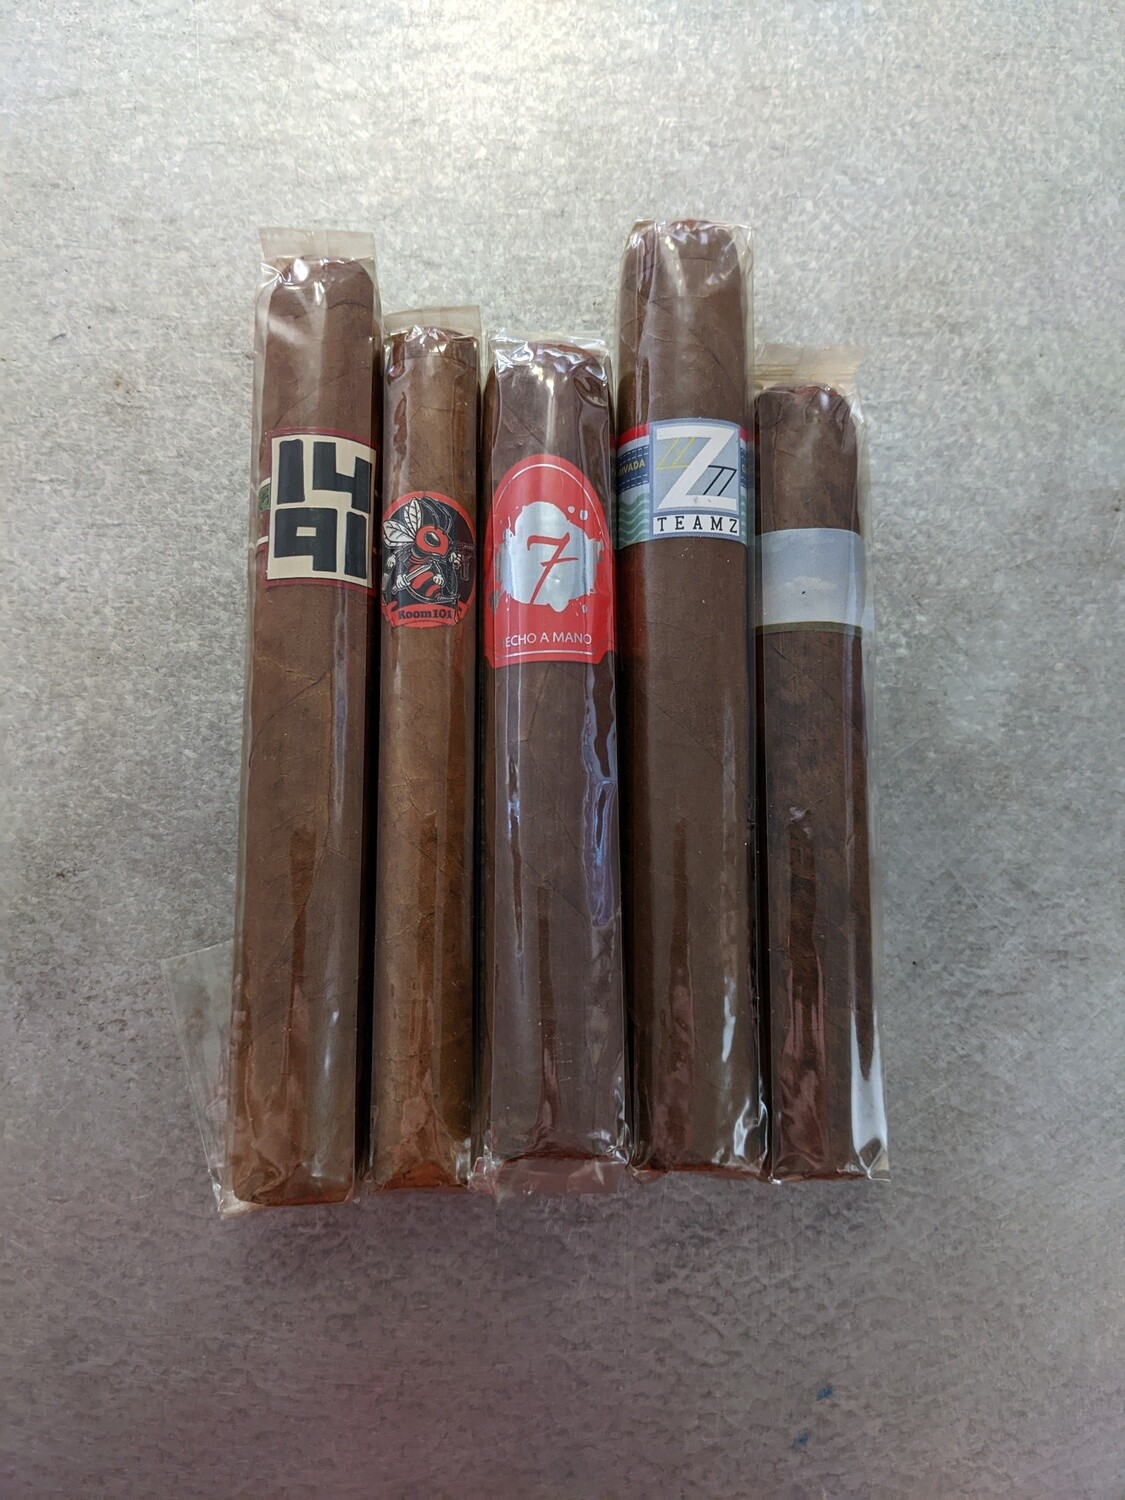 El Septimo and Sons Sampler by Privada LCA